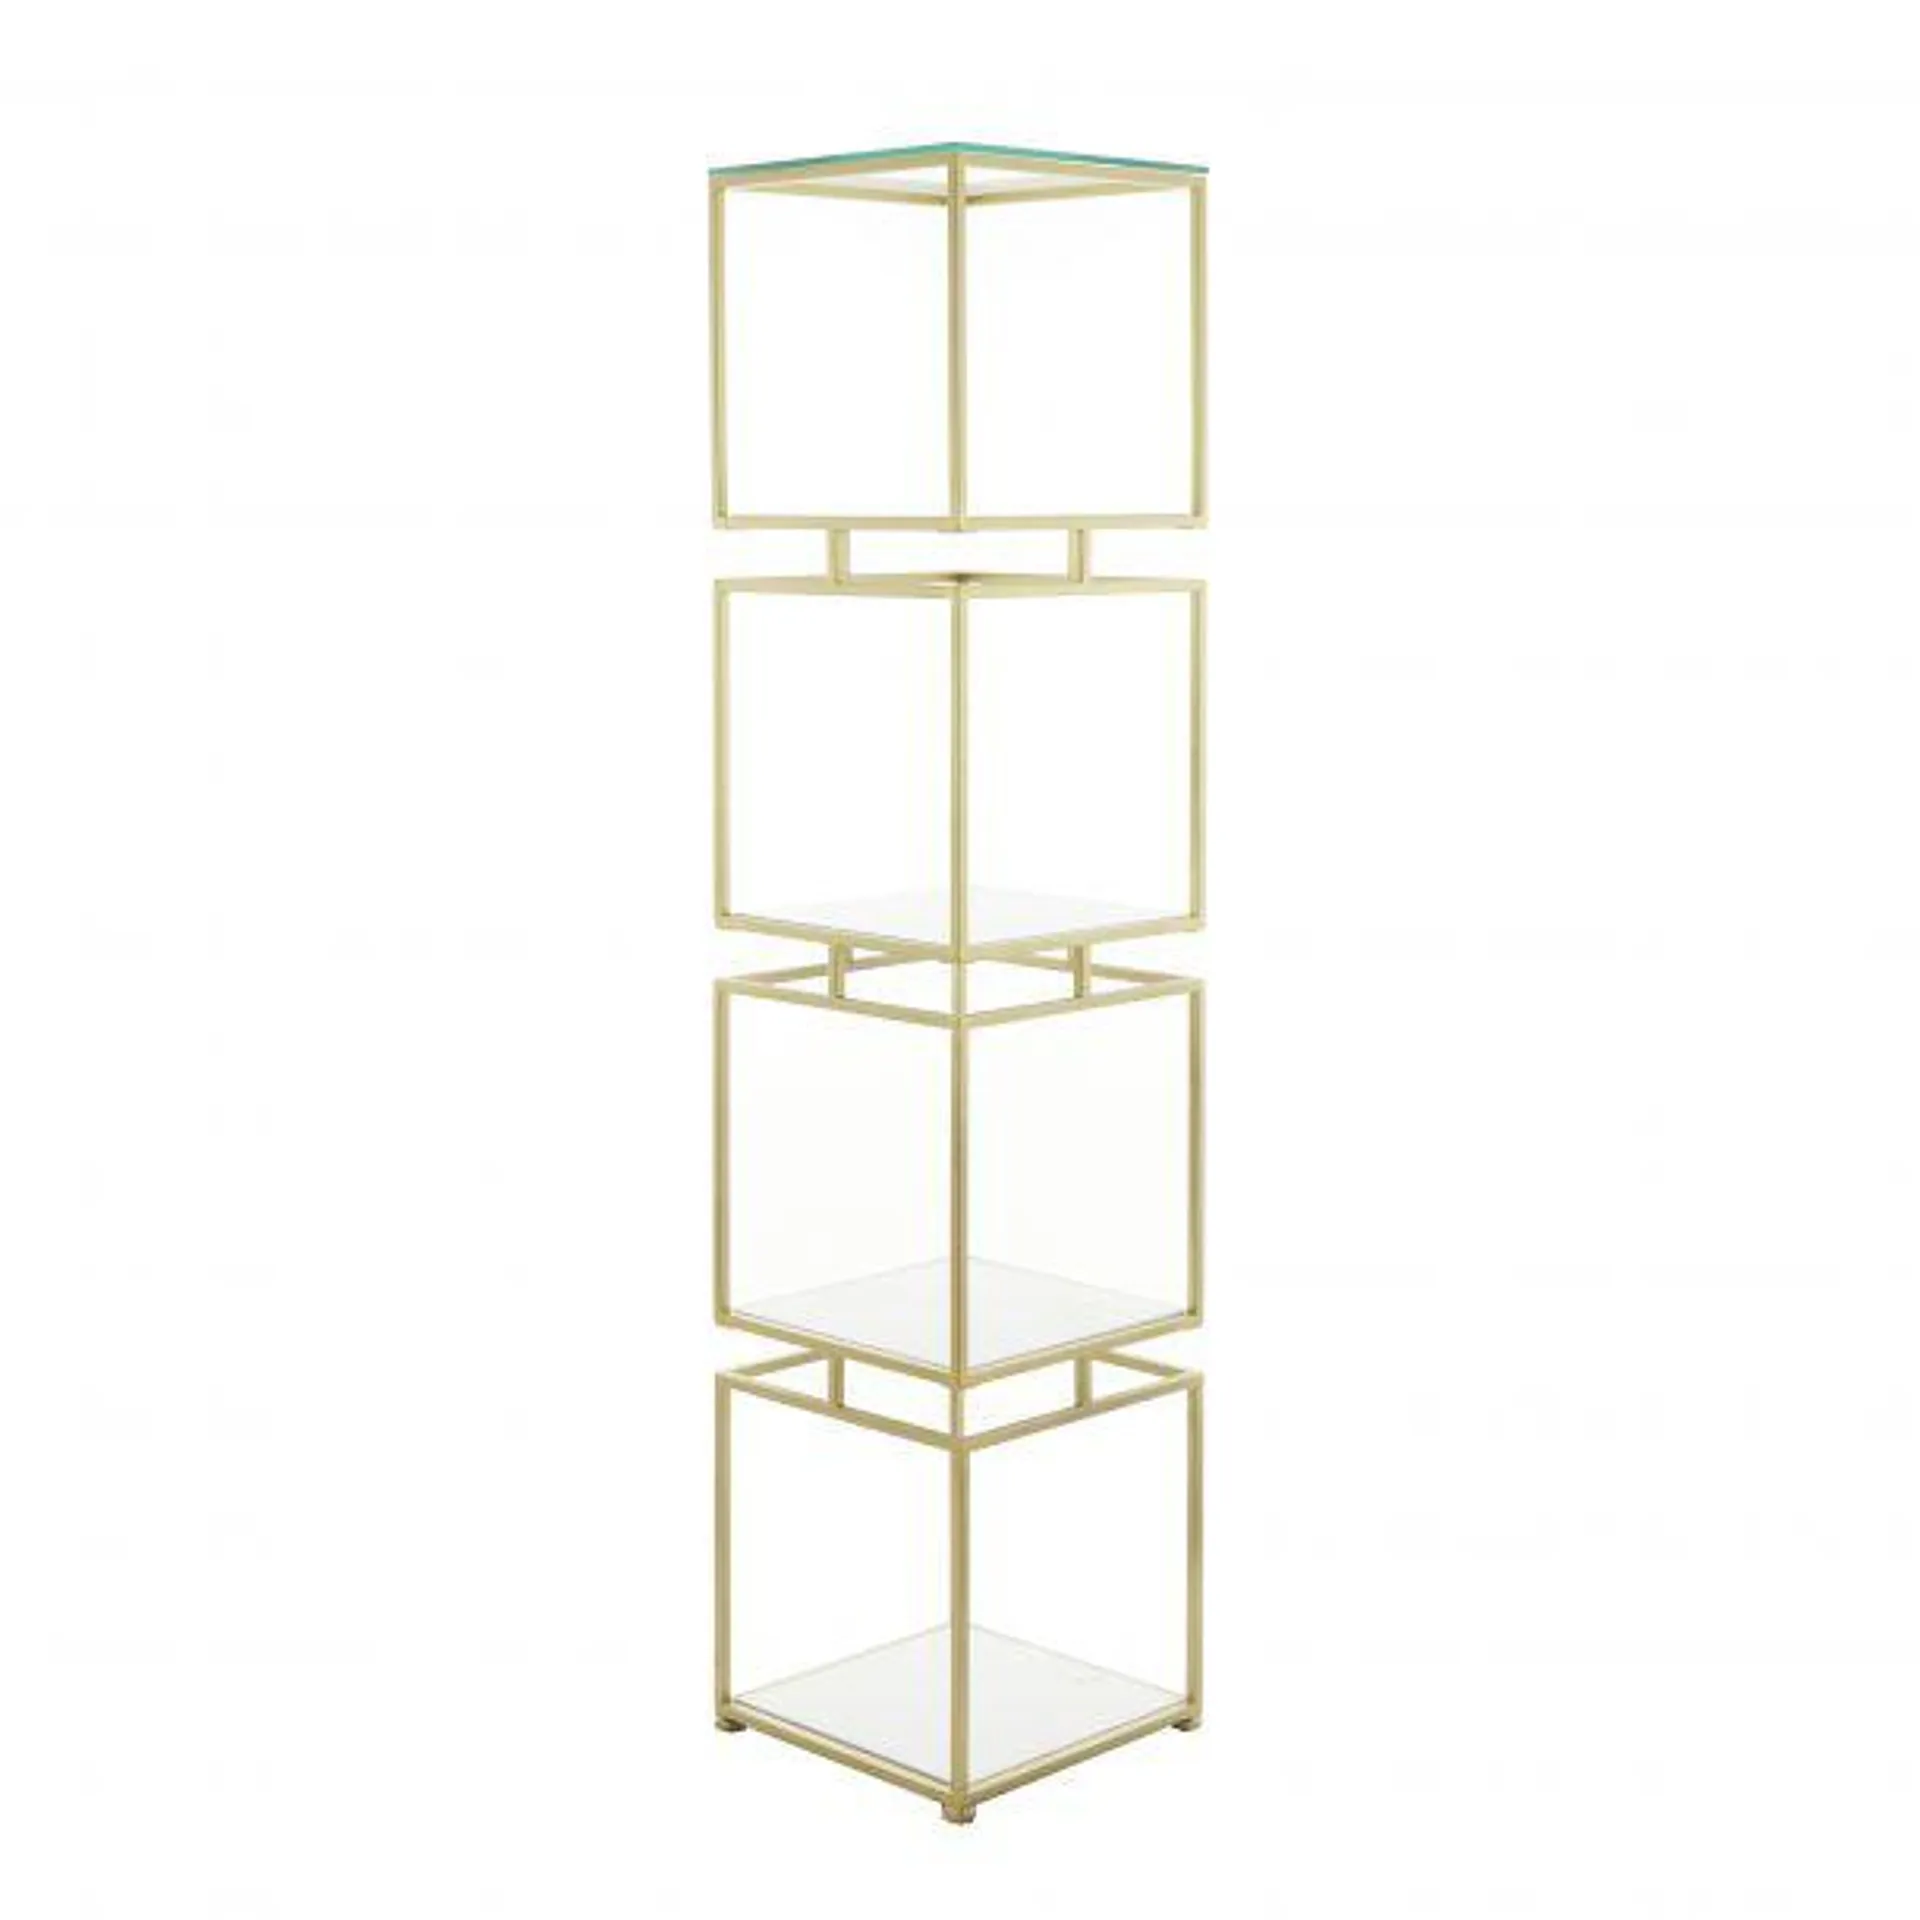 Gold Marble Glam Shelving Unit, 14 x 14 x 62